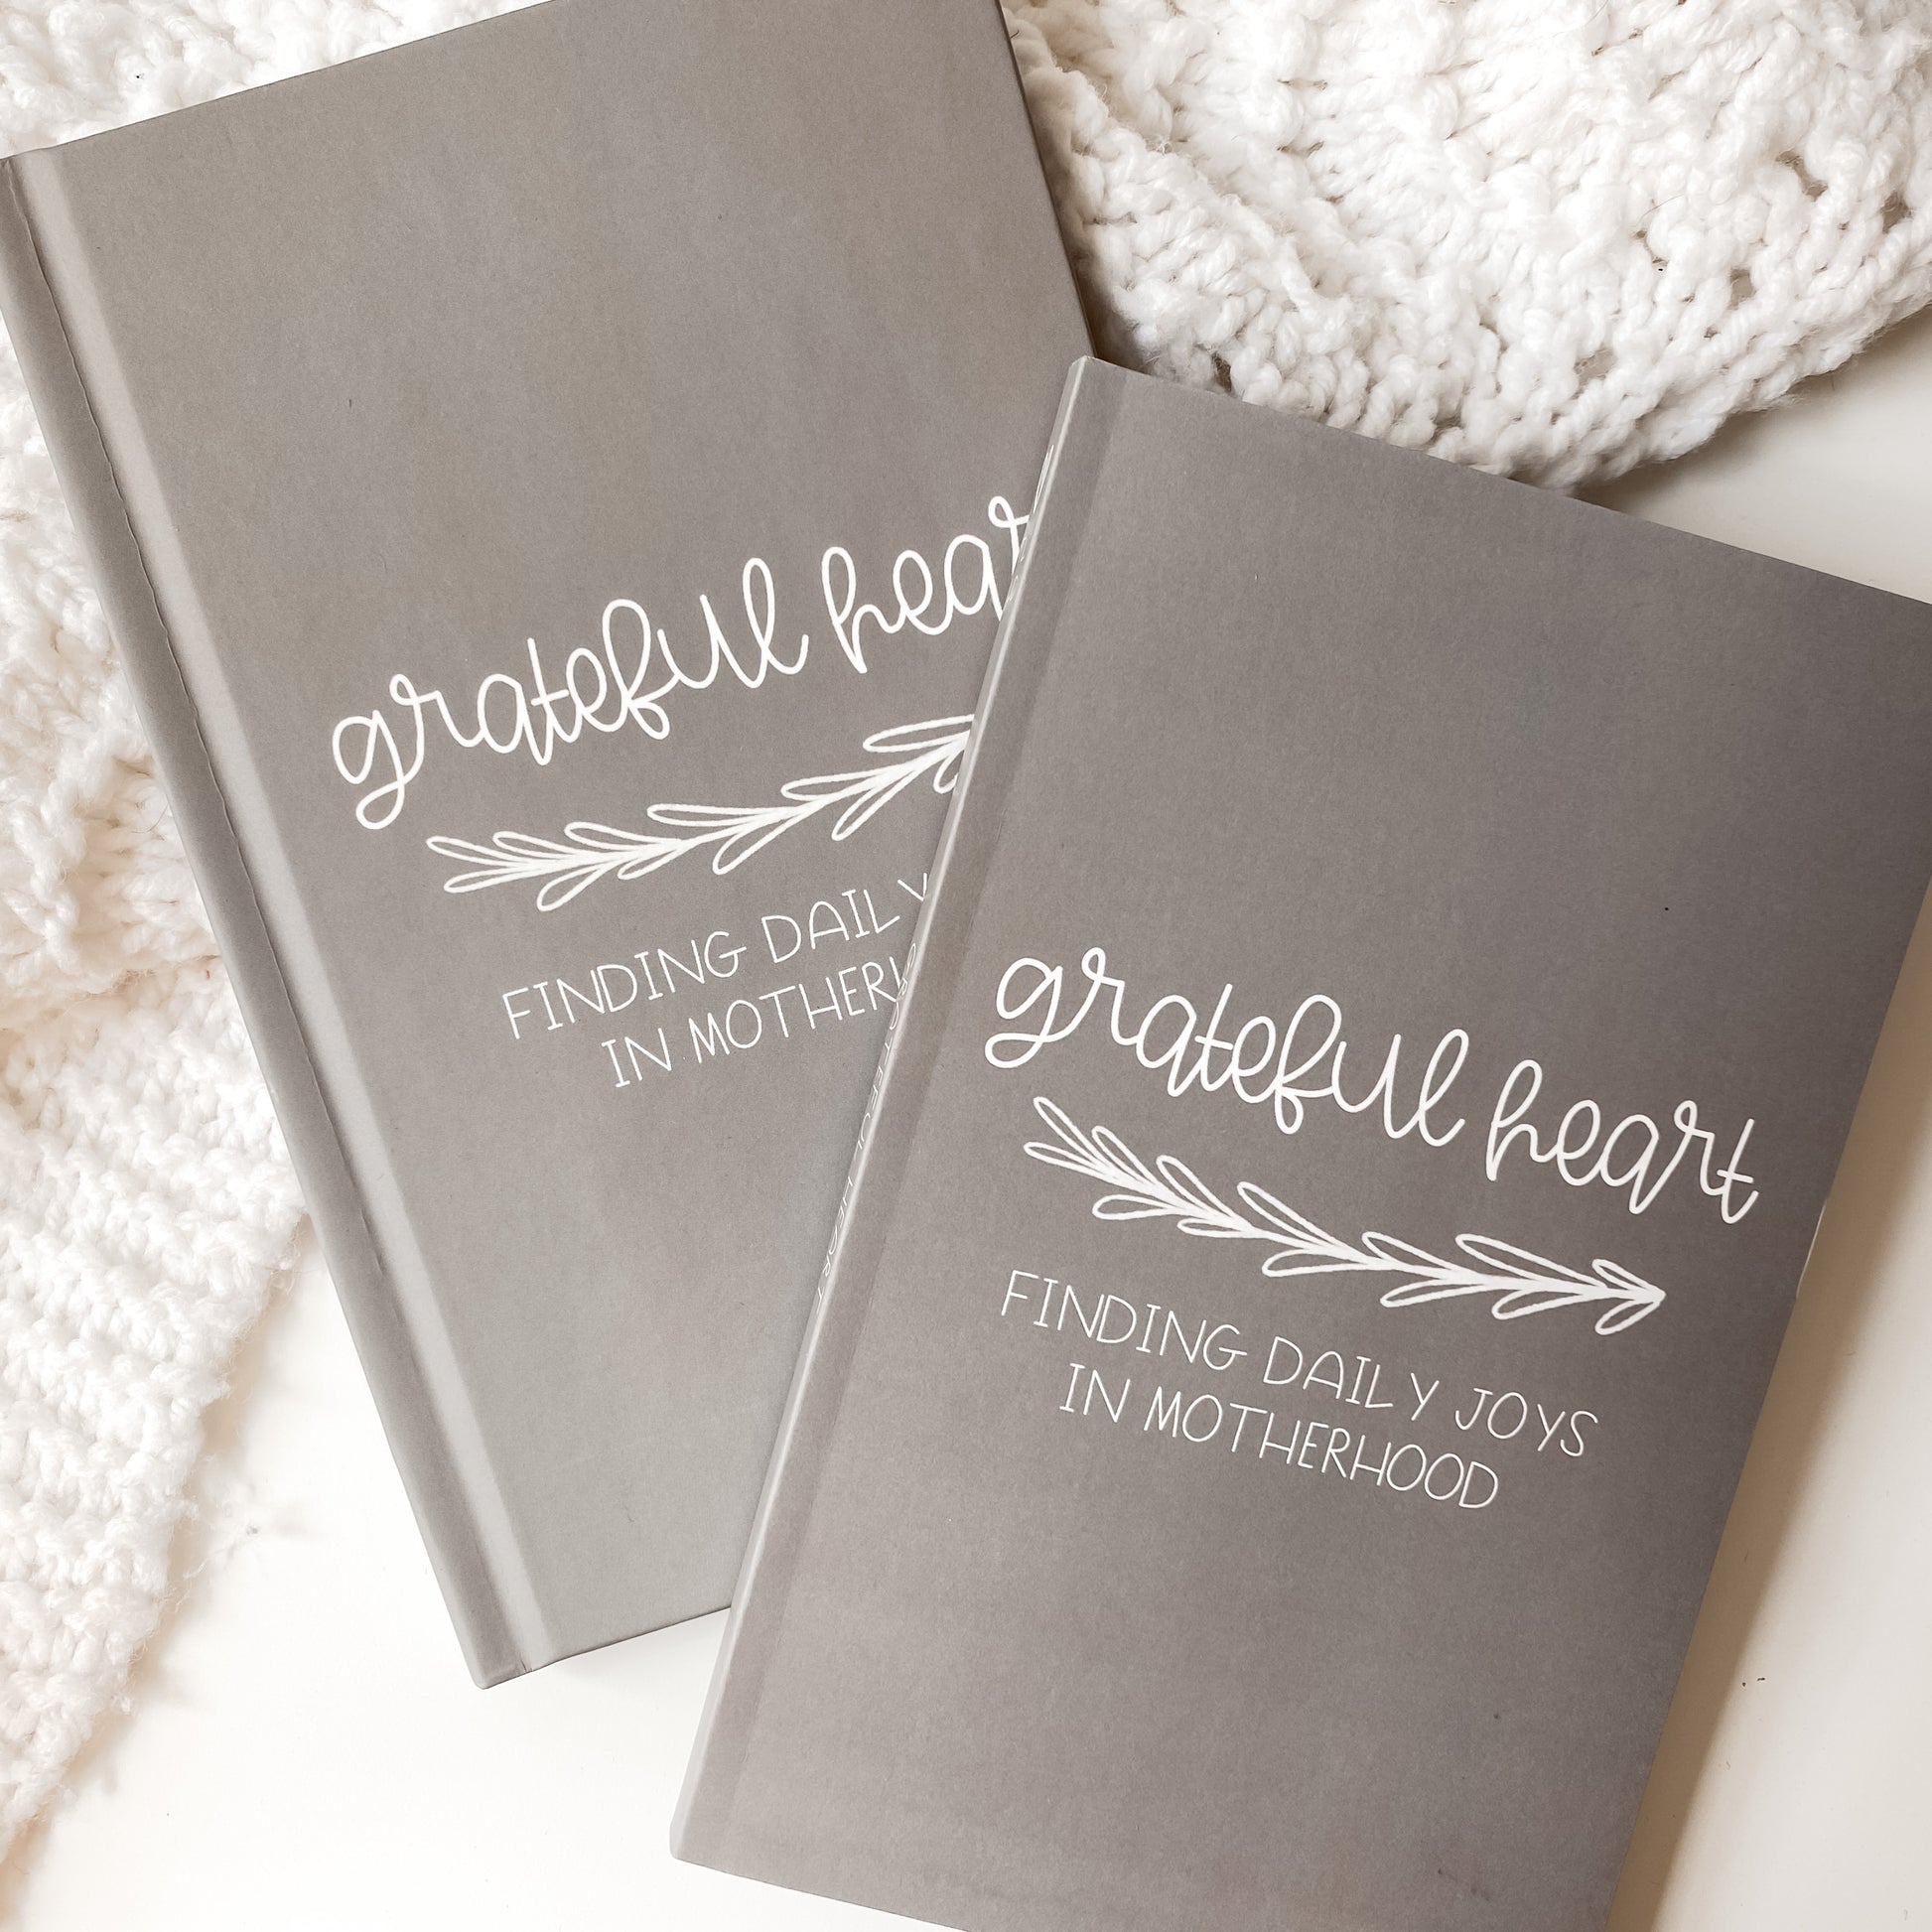 Grey gratitude journals in hardcover and paperback titled Grateful Heart Finding Daily Joys in Motherhood